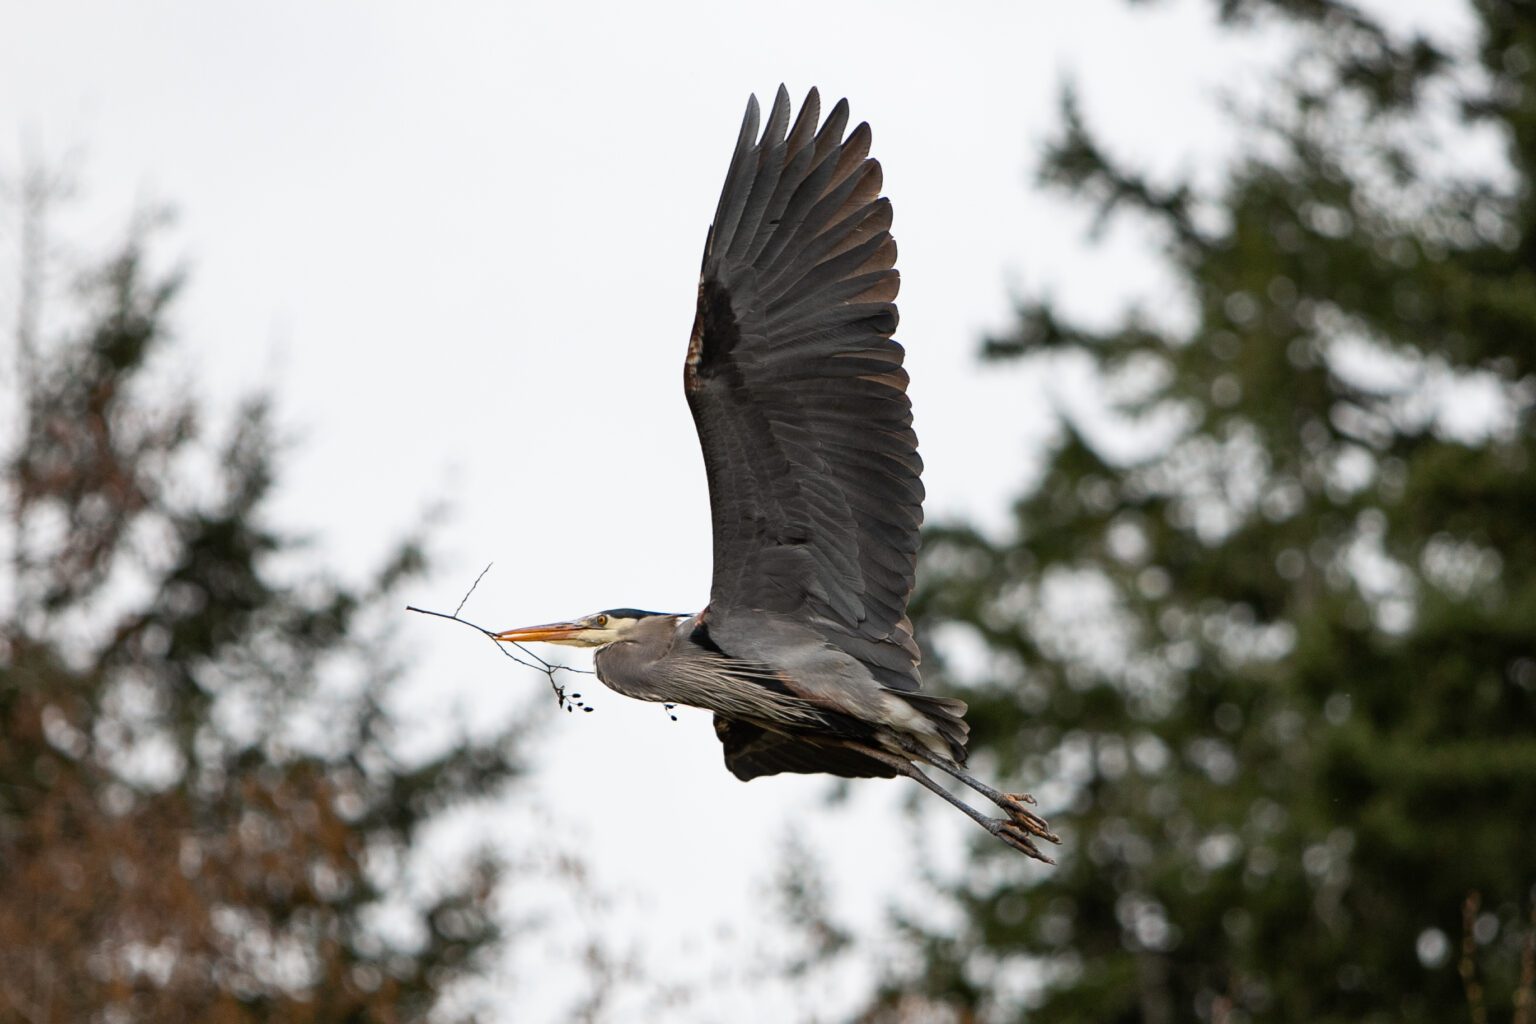 The Bellingham City Council voted Monday to purchase a 1.43 acre property adjacent to a Great blue heron colony near Post Point. The lot